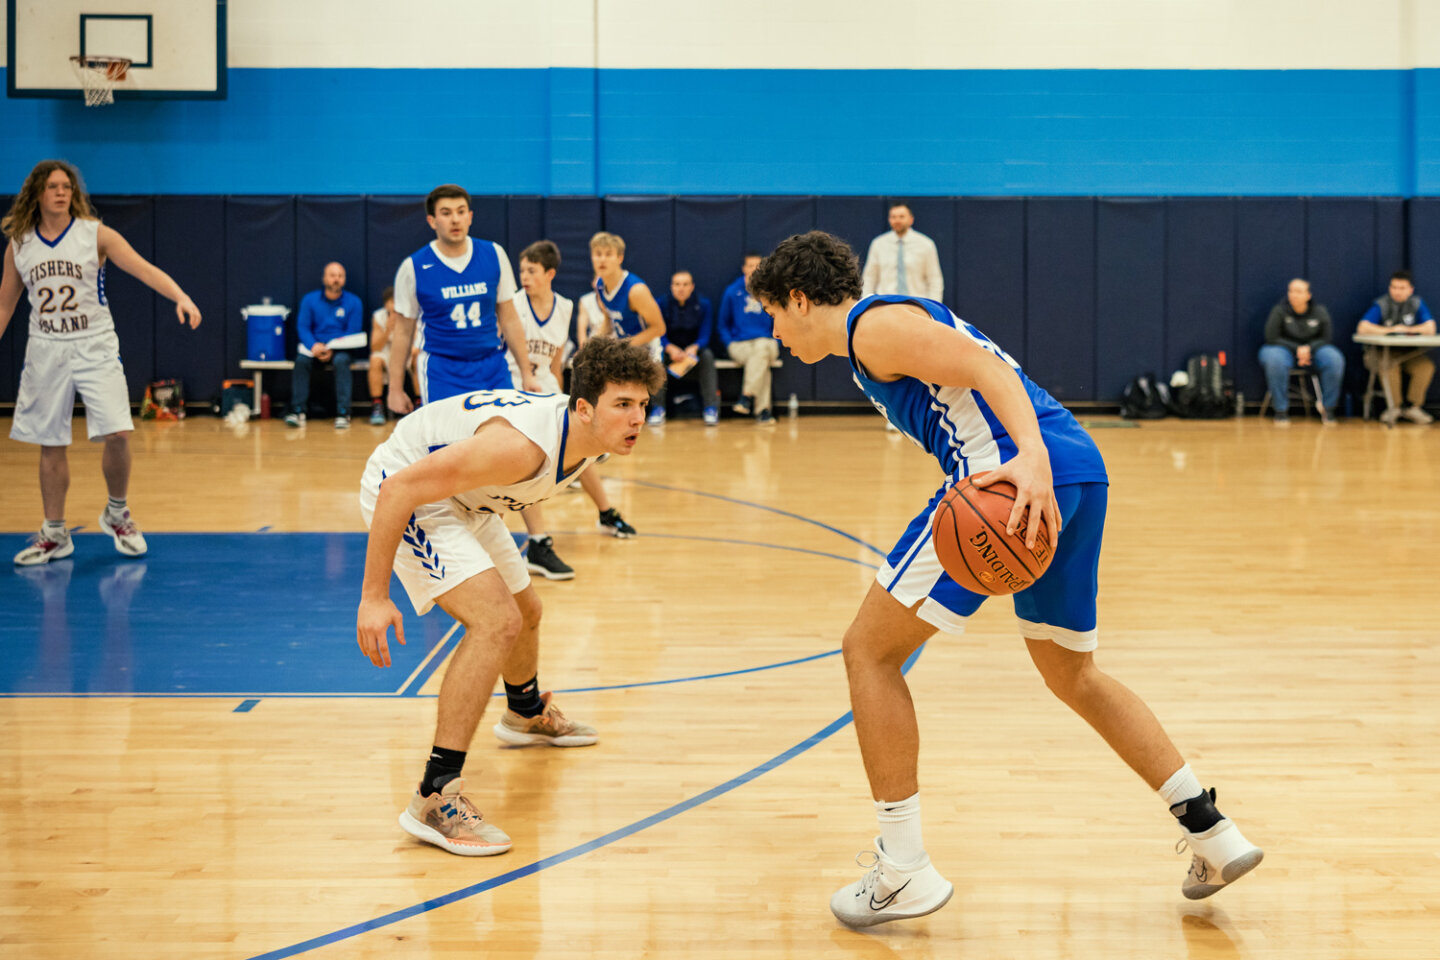 Boys basketball player dribbles toward the basket from the free throw line with defending player crouched